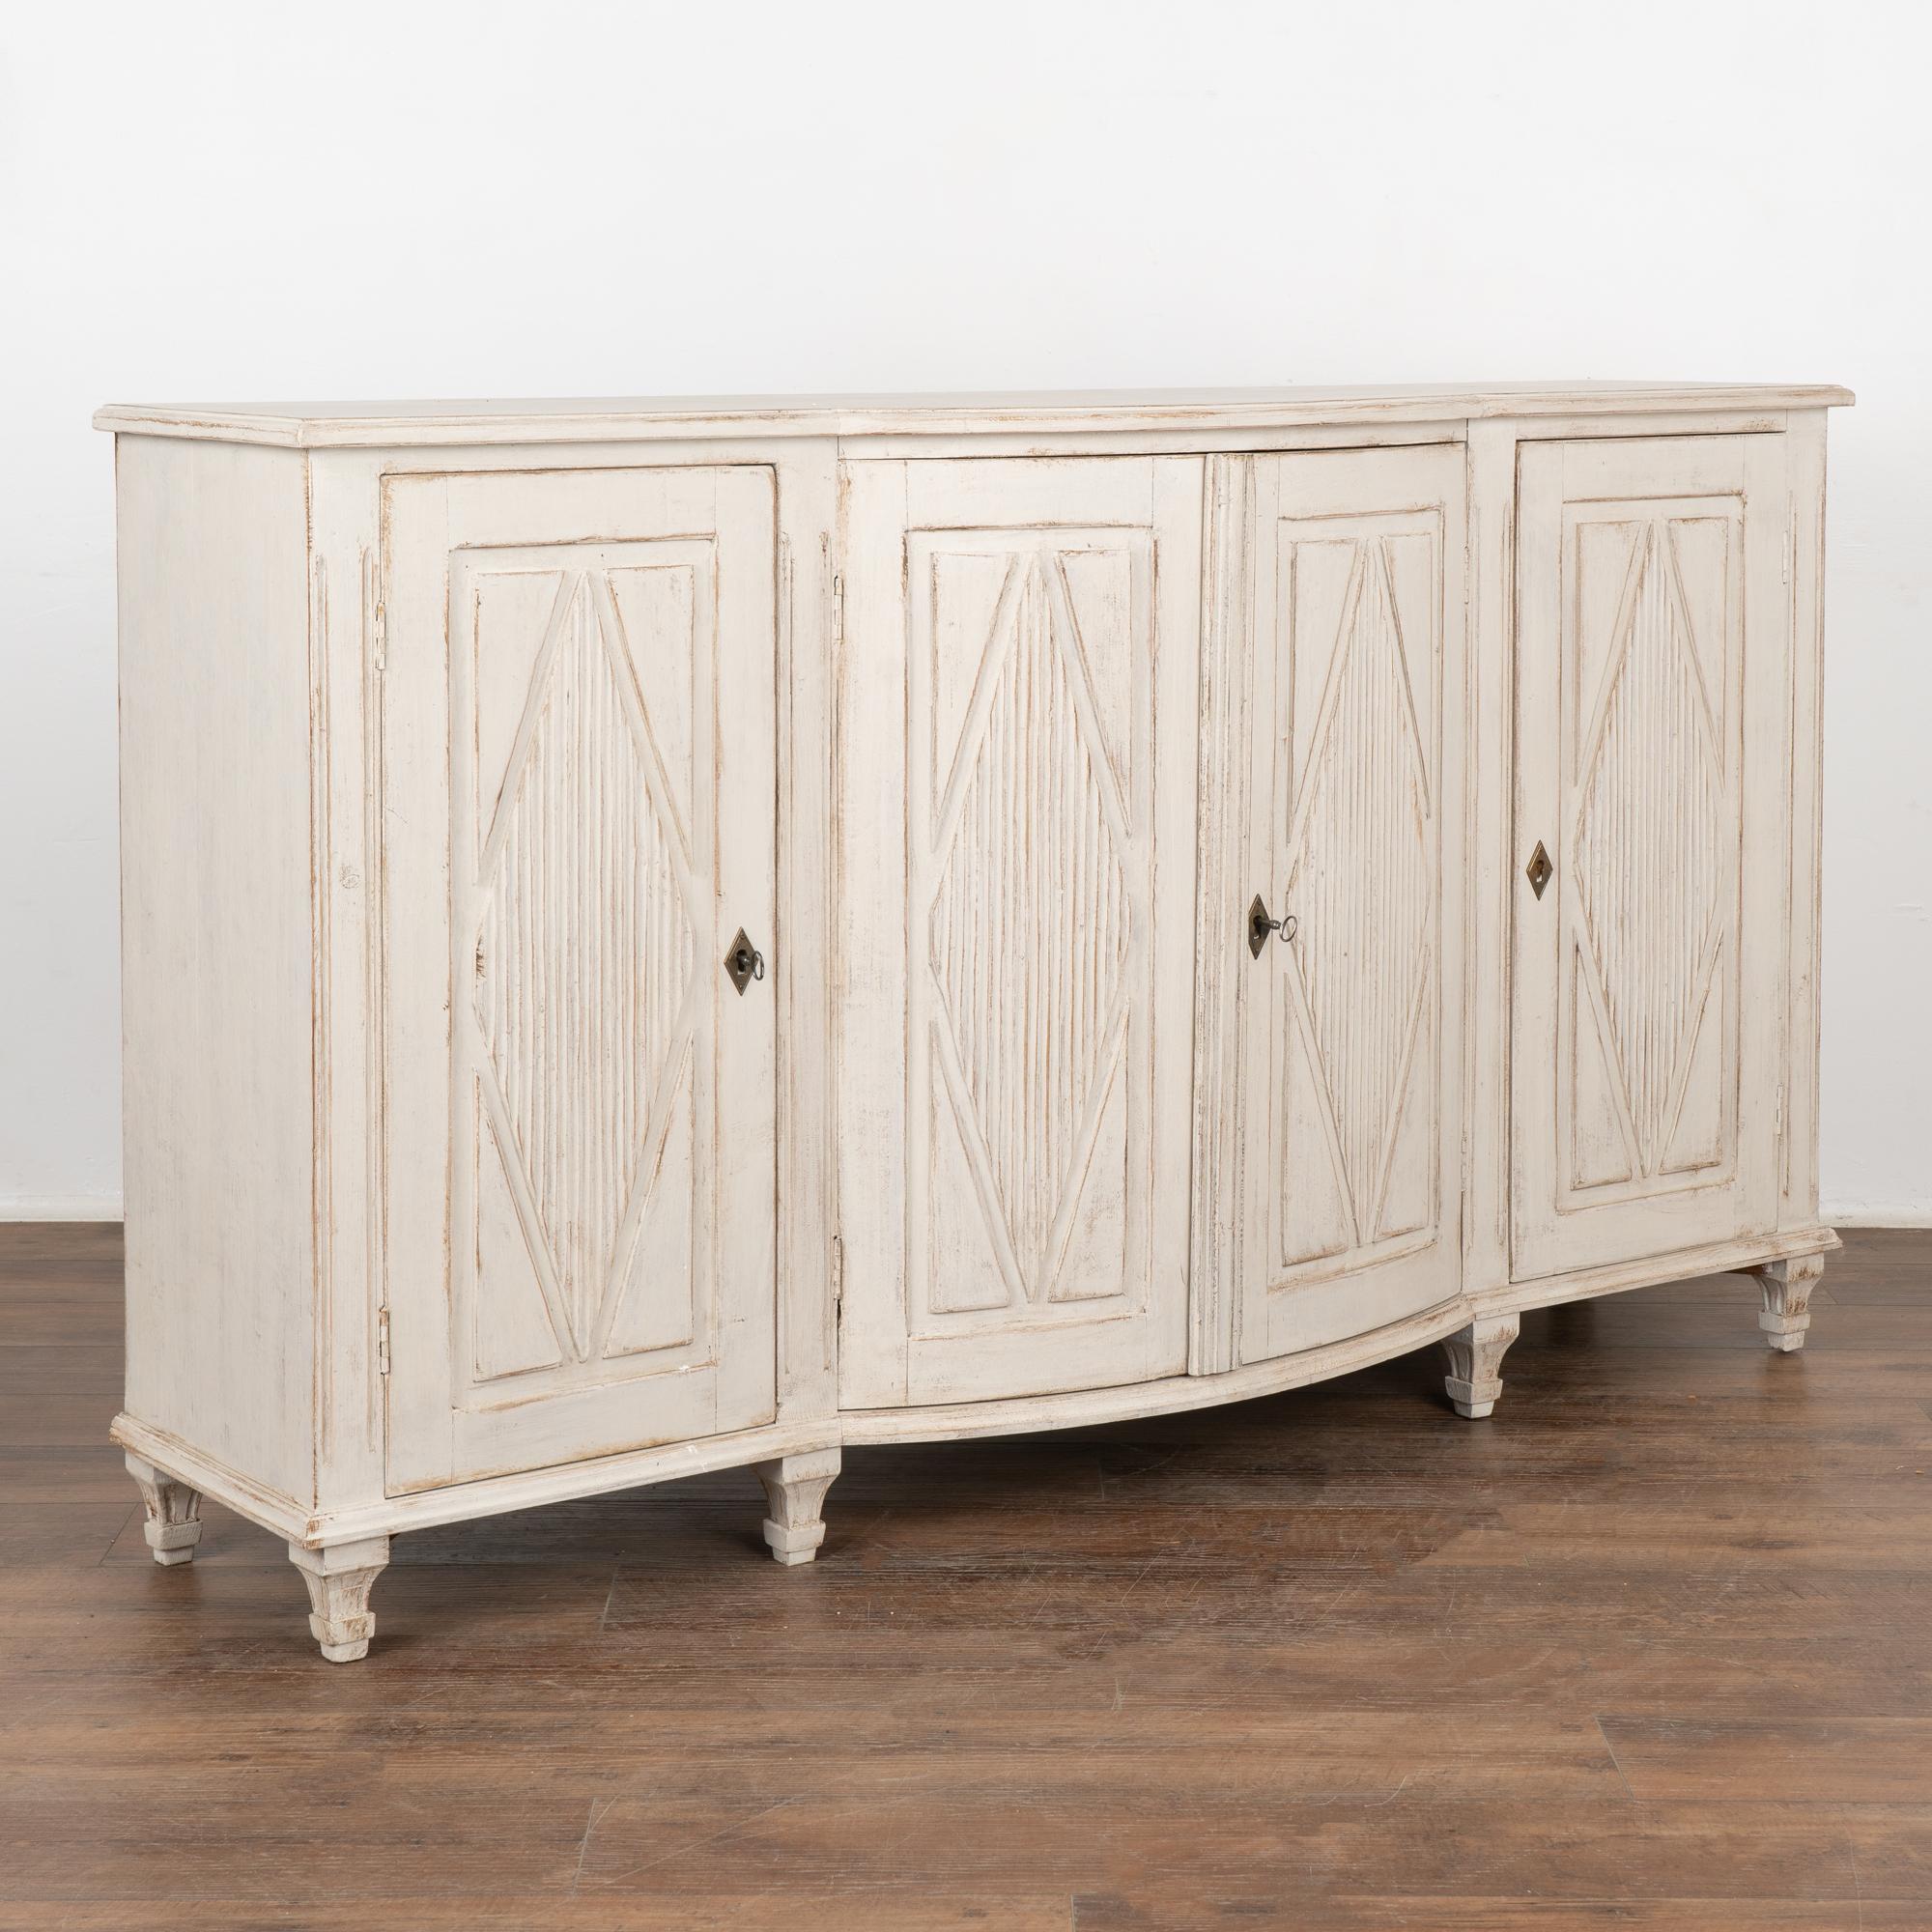 Swedish 5.5' long Gustavian pine sideboard buffet server with traditional carved fluted diamond panel motif on each of the four doors.
Tapered fluted feet. Central 2 cabinet doors bow slightly outward. Door latches function, two keys included. One